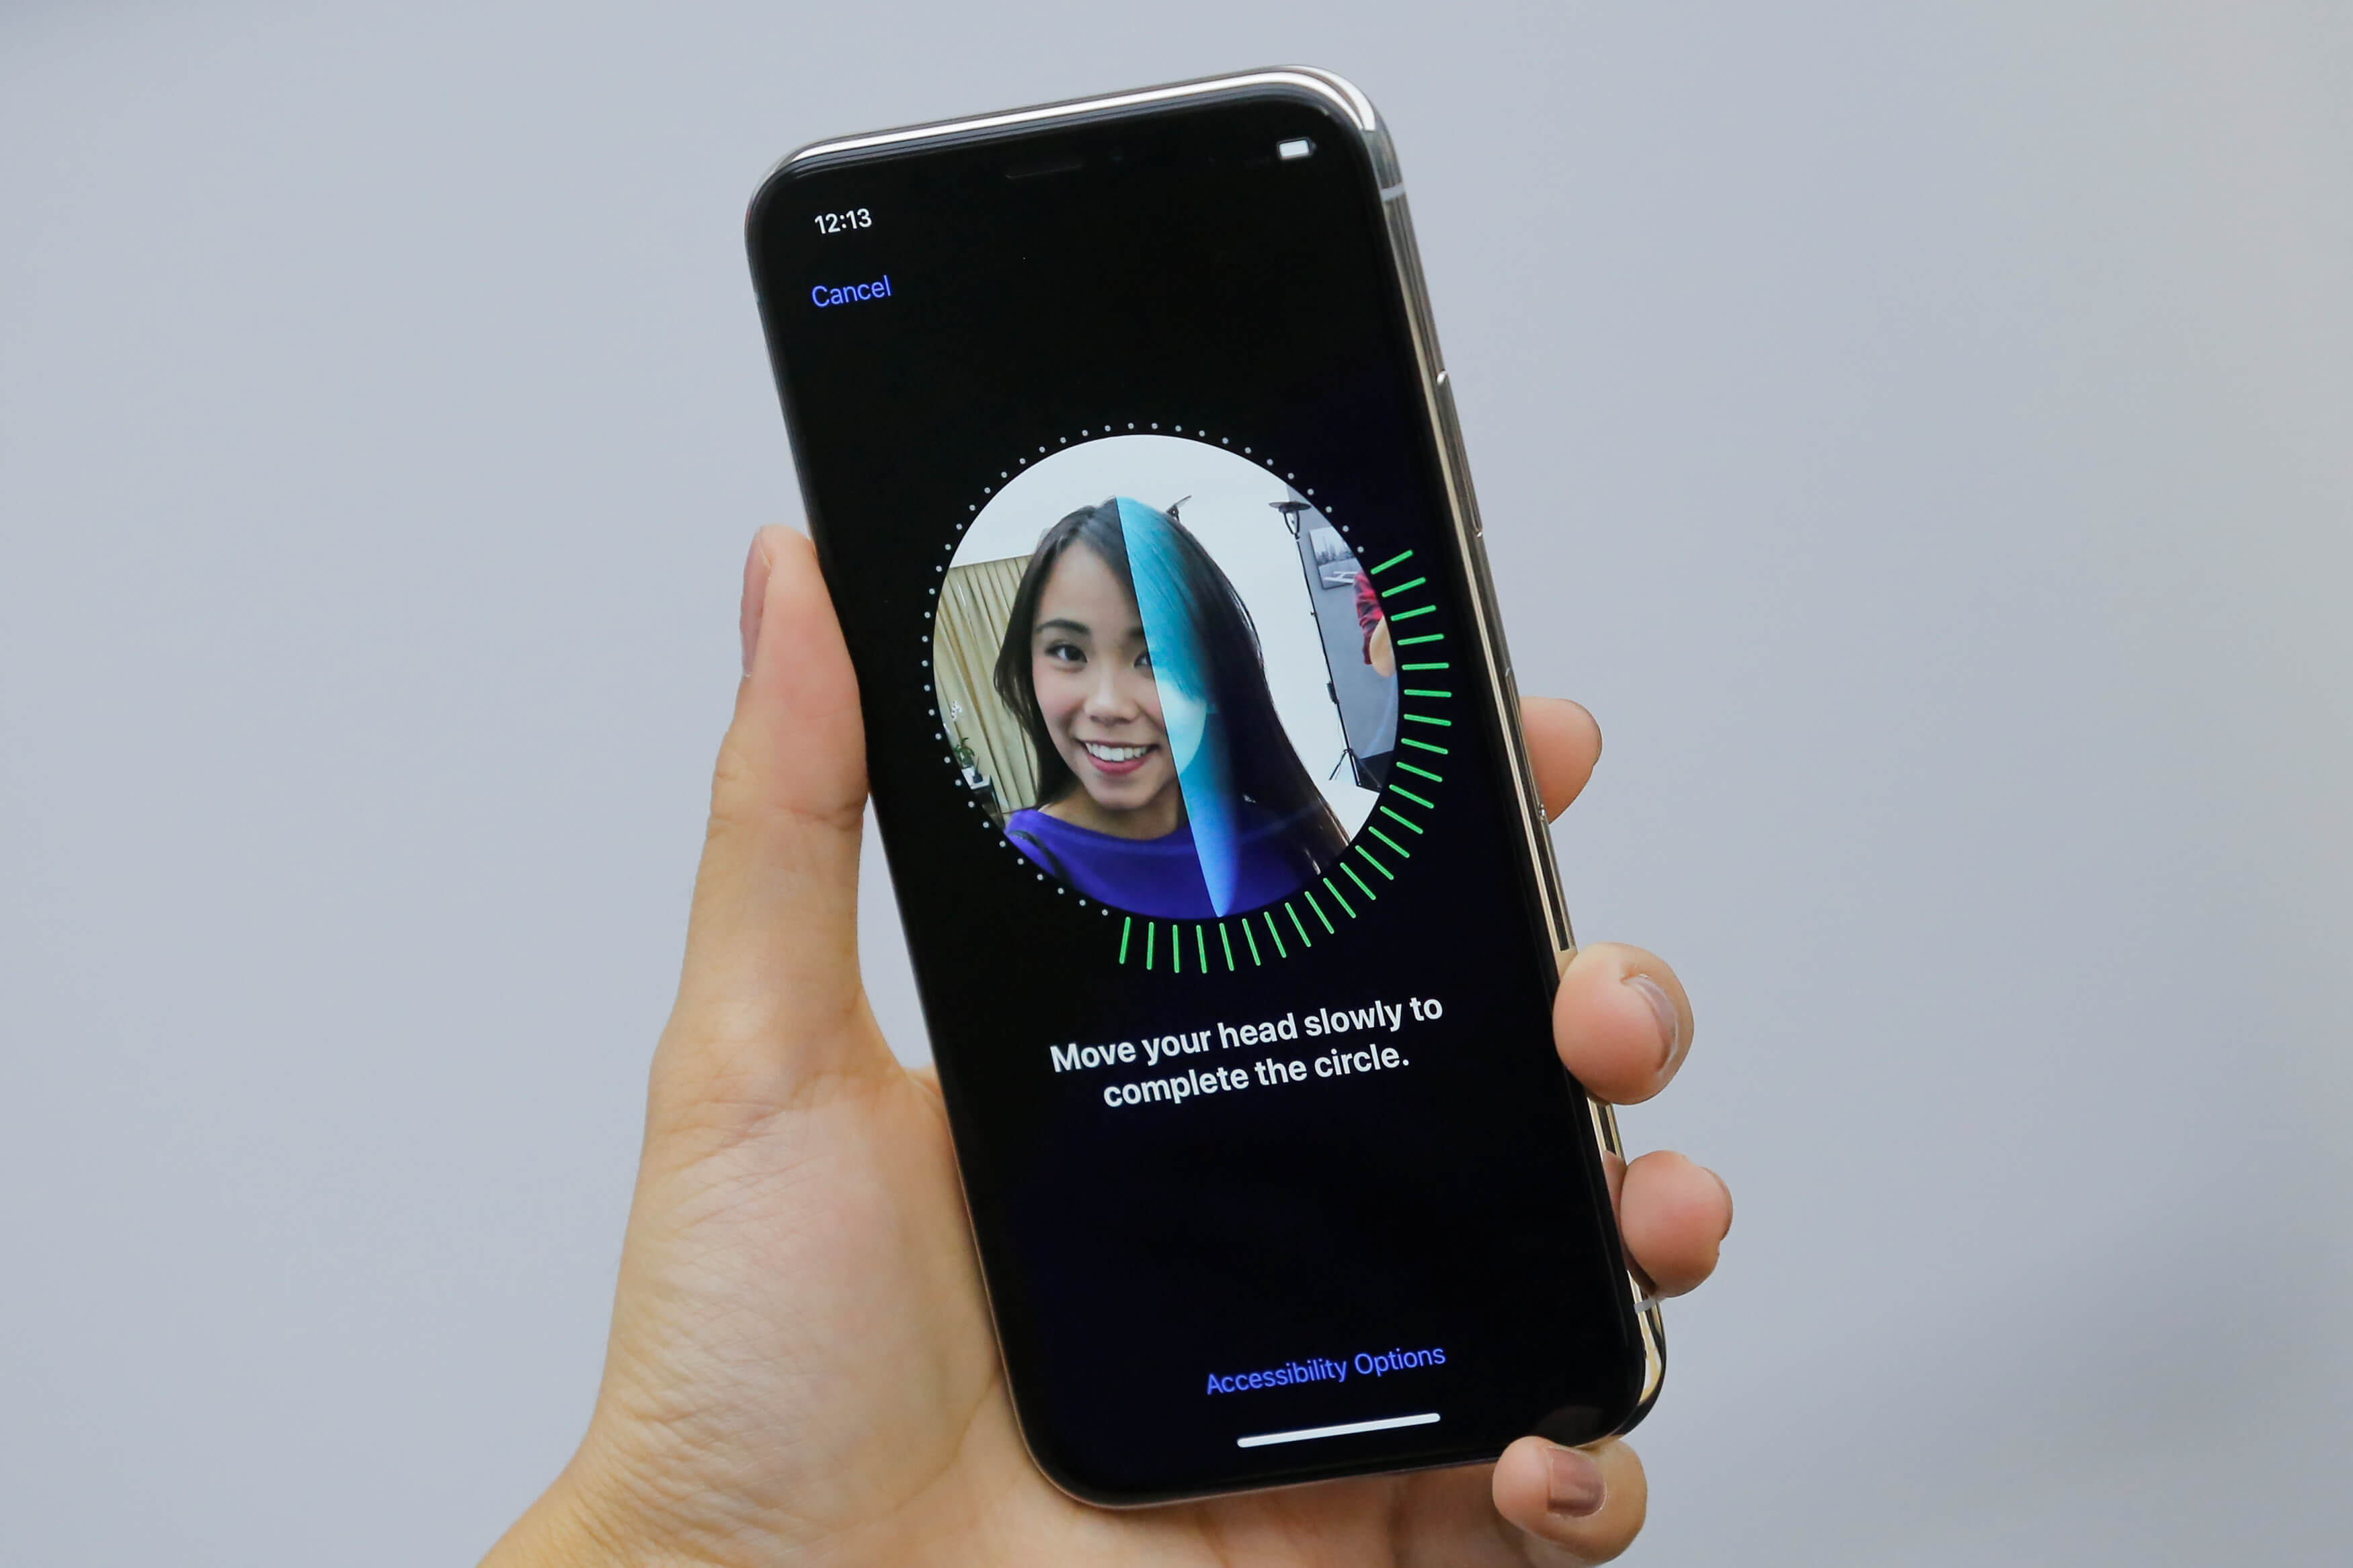 iPhone X users are inadvertently training Face ID to recognize siblings